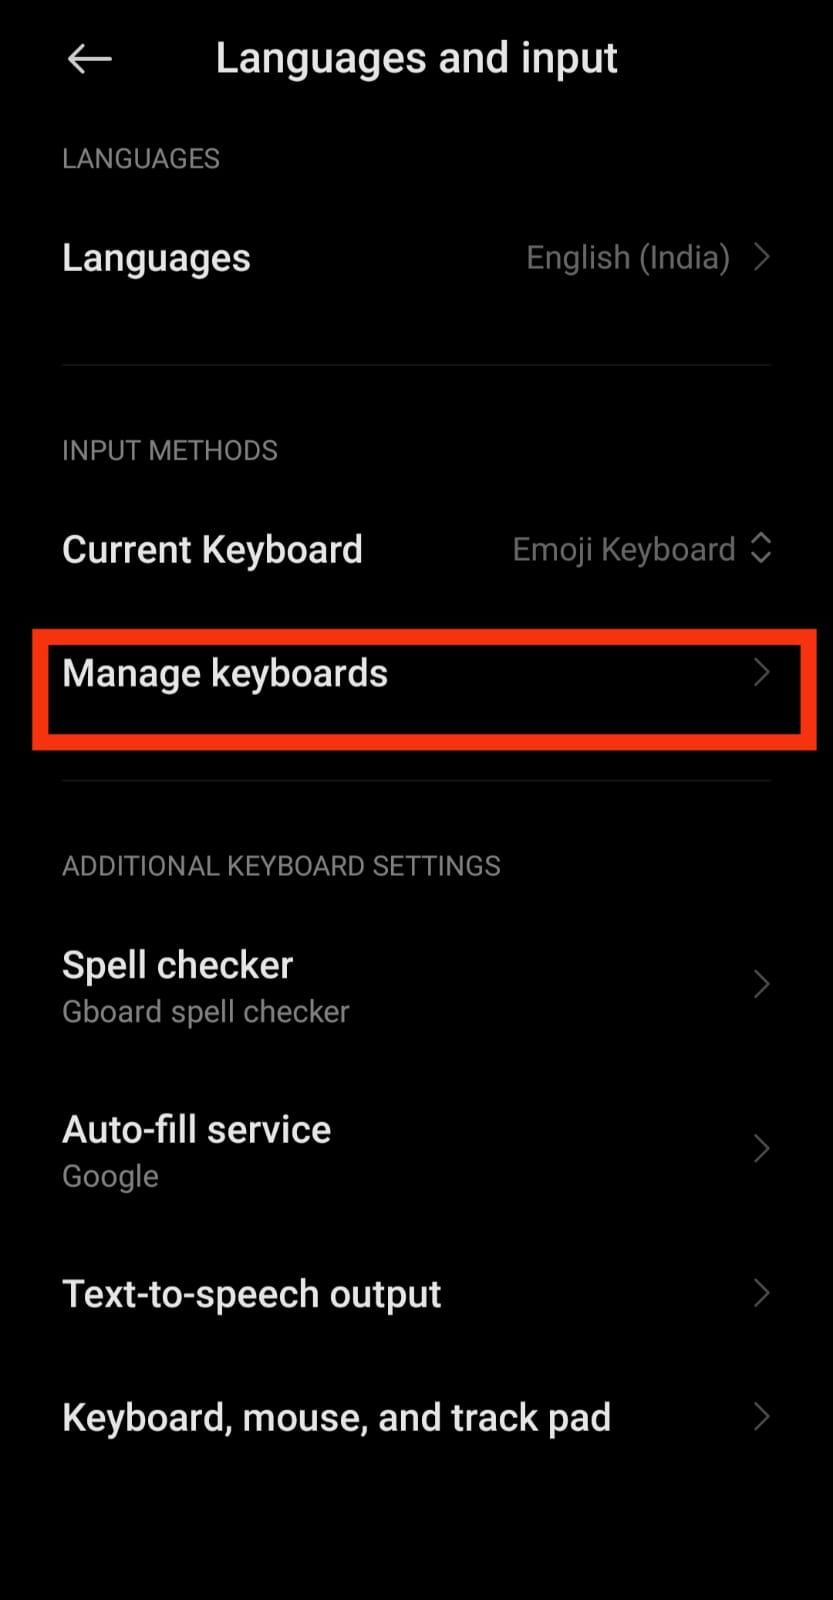 Now select Manage keyboards.